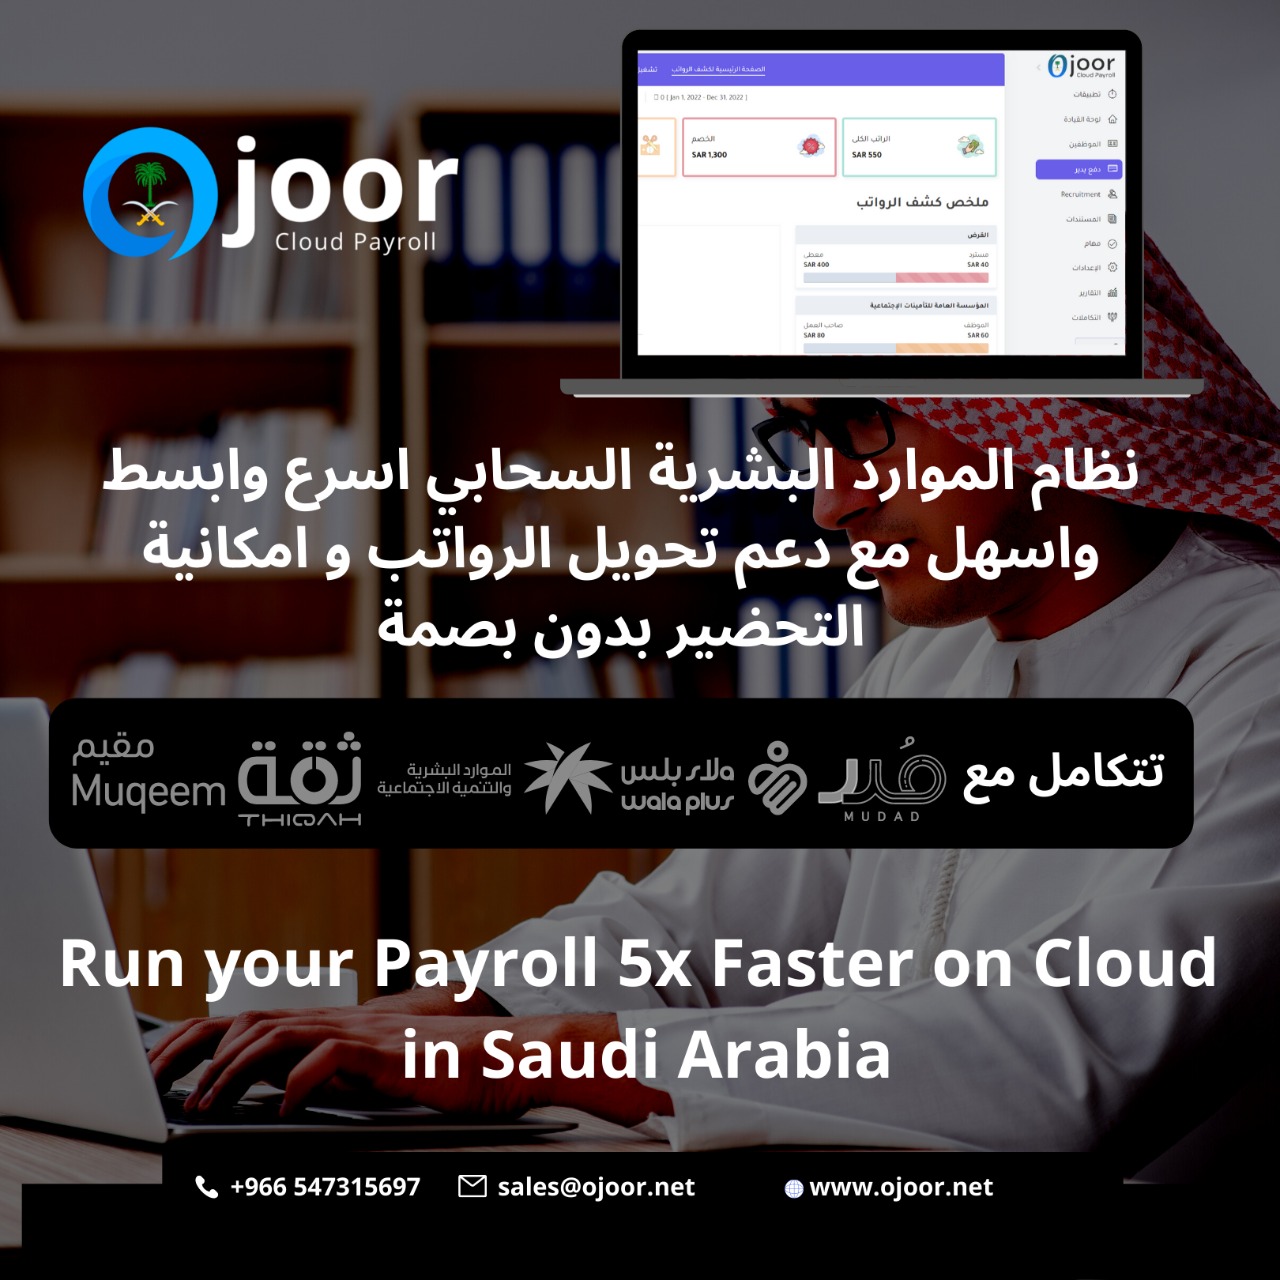 What features should look for in a Payroll Software in Saudi Arabia?